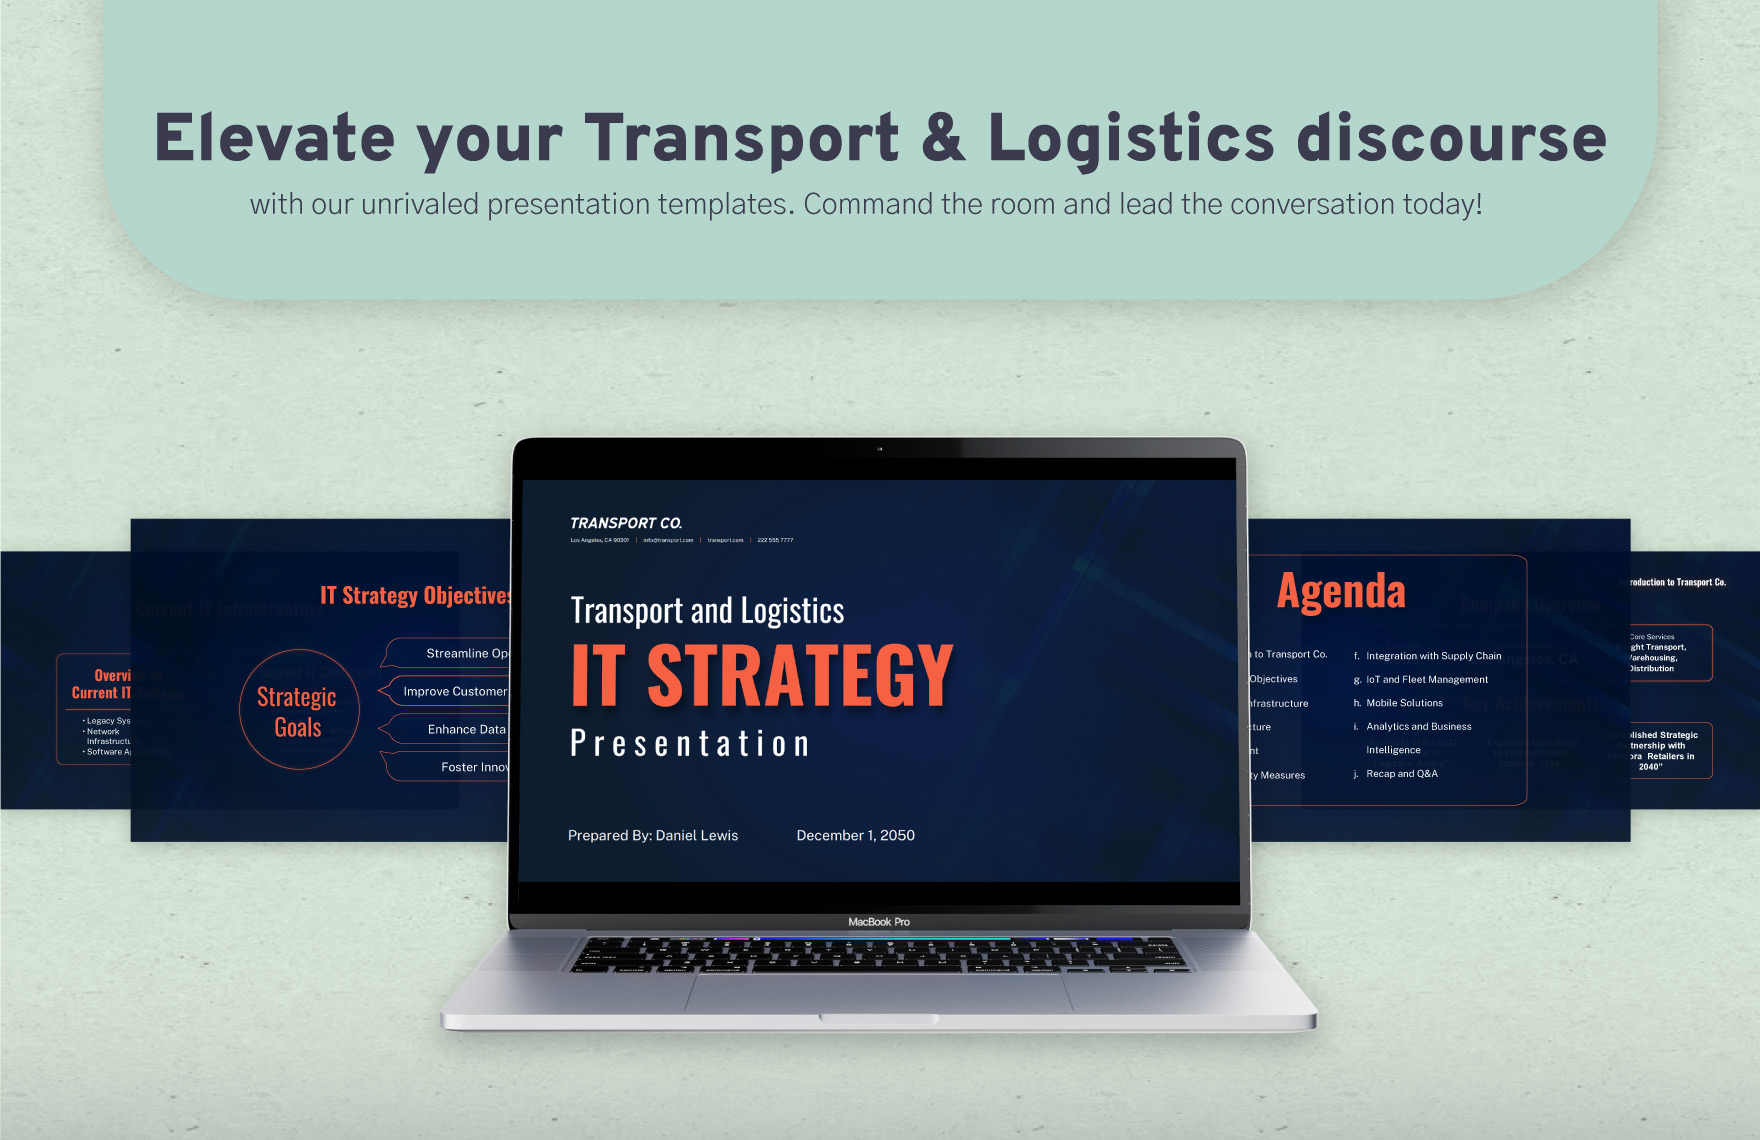 Transport and Logistics IT Strategy Presentation Template